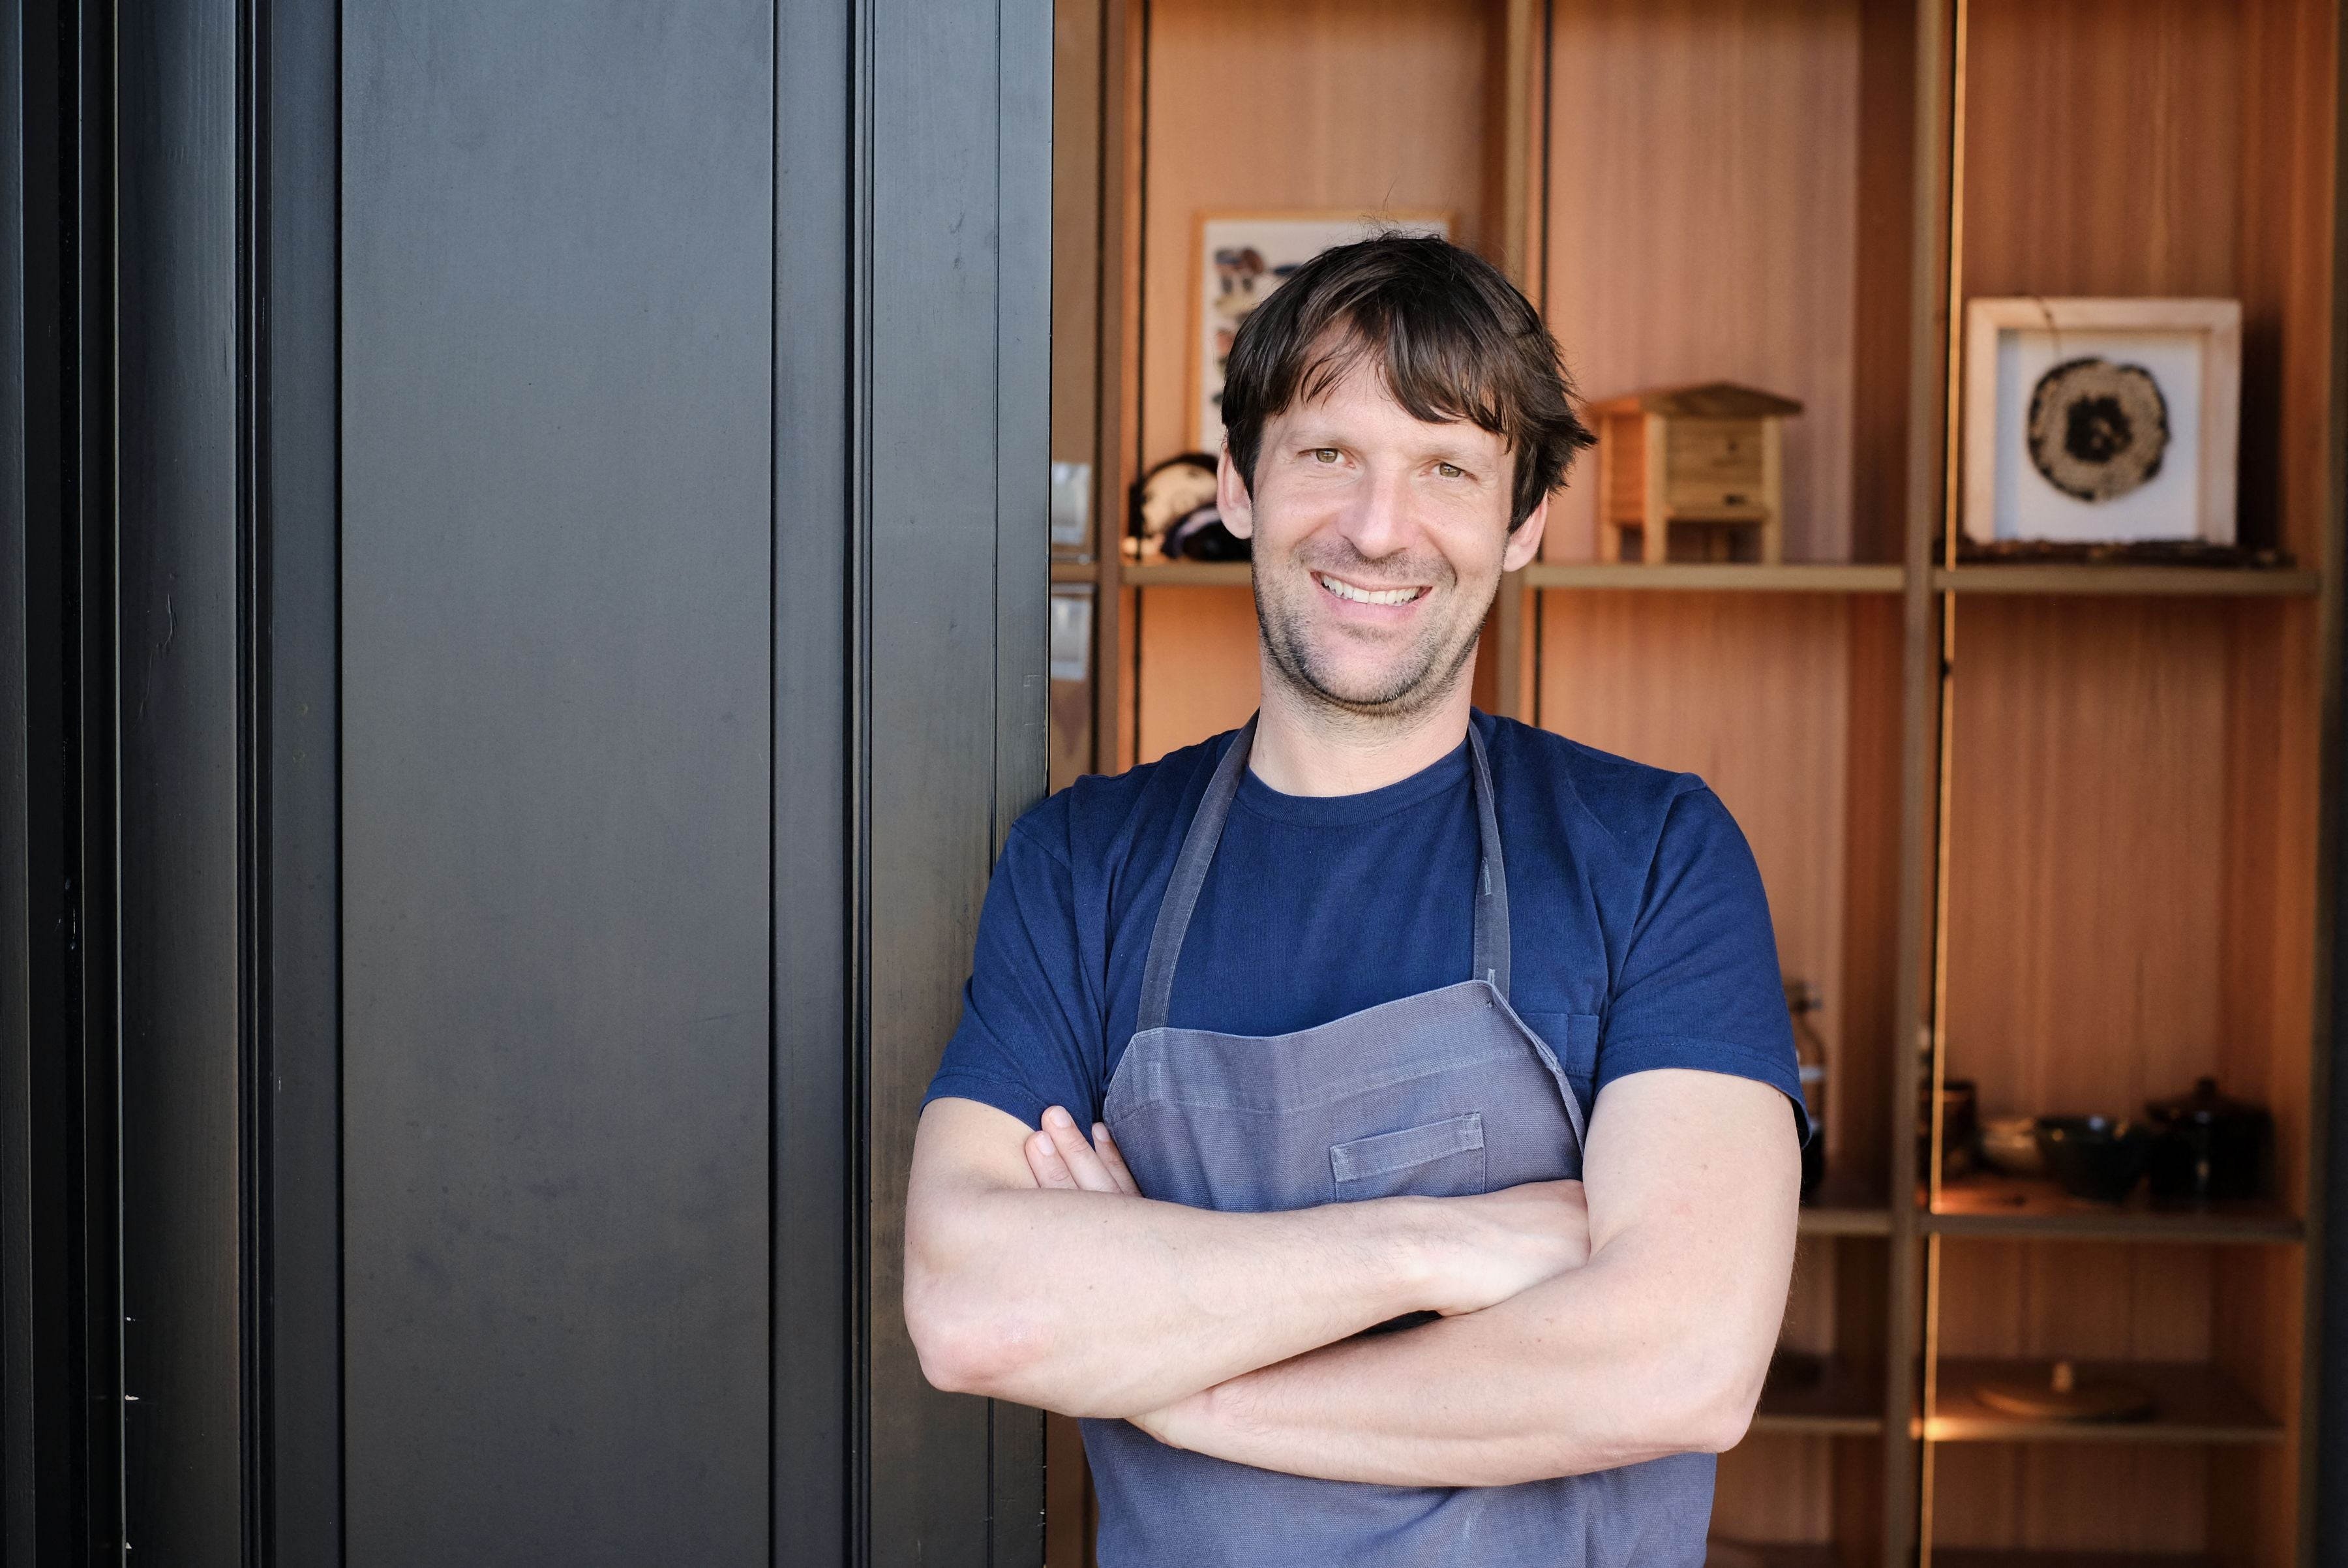 Rene Redzepi, the chef and co-owner of Noma, ranked as the world’s number one restaurant